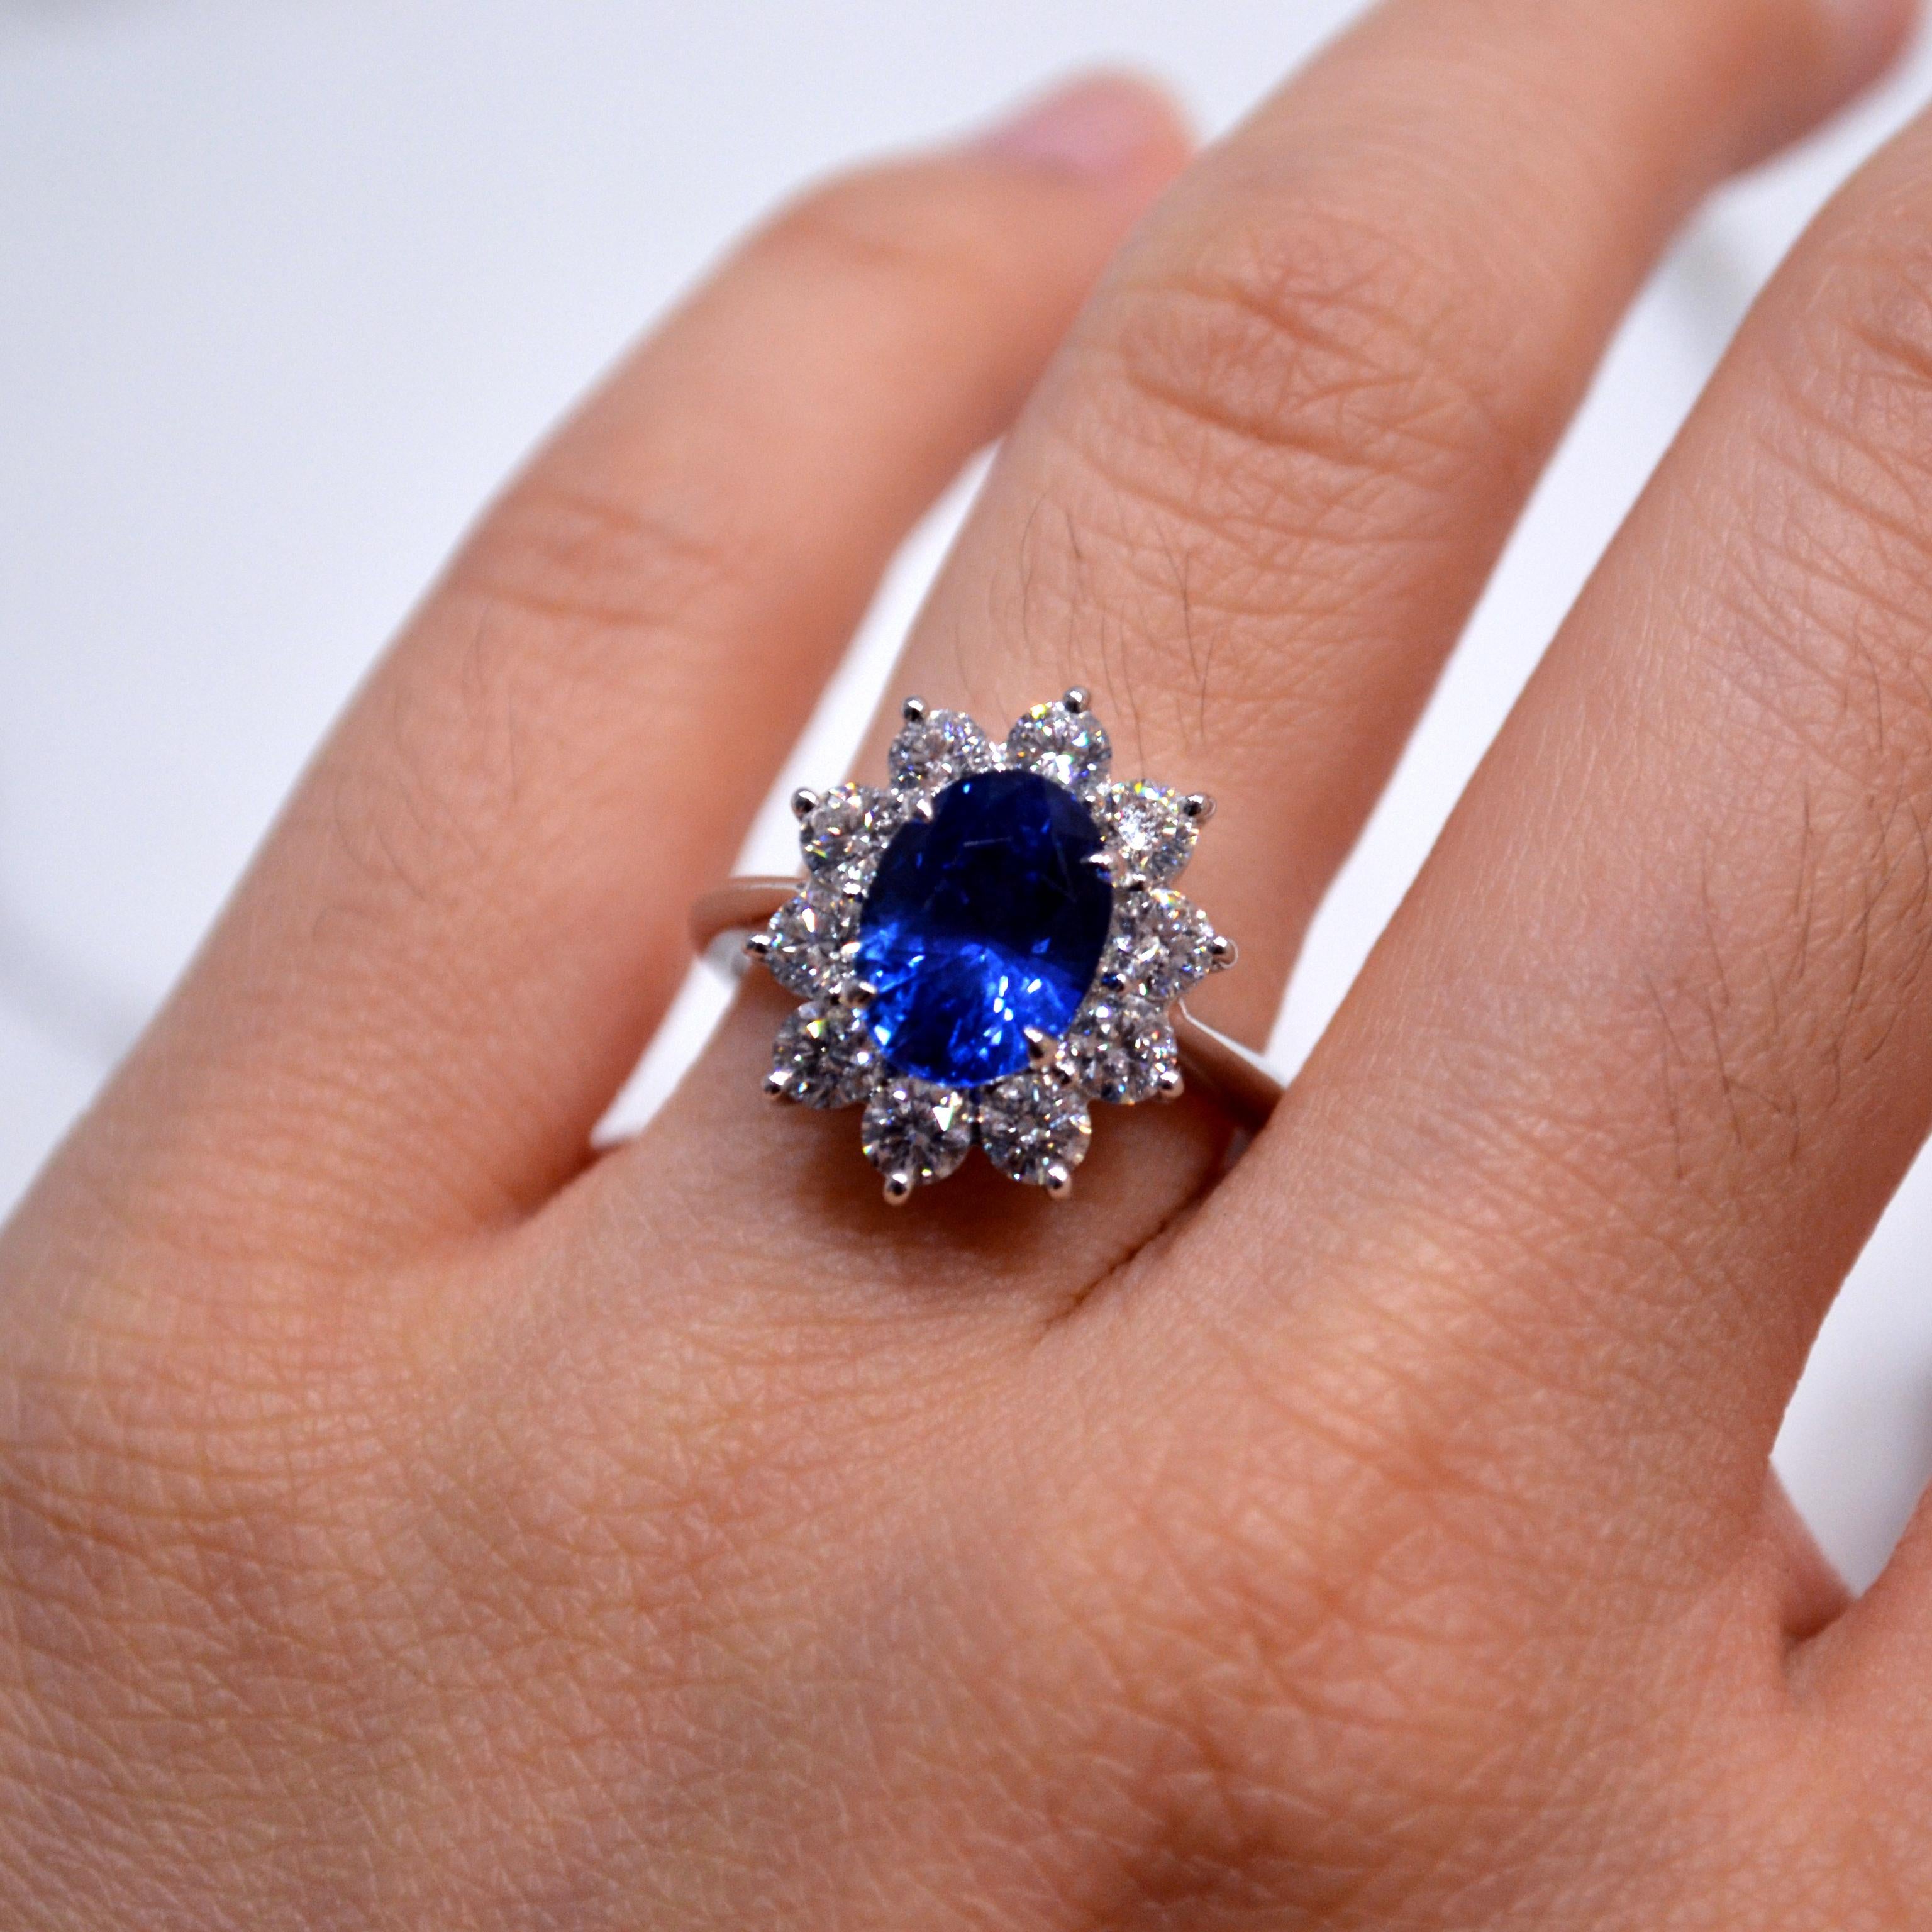 Princess Diana Style Ring in 18K white gold set with an oval cut Ceylon Blue Sapphire (3.33 carat) and 10 round brilliant cut Diamonds (1.25 carats)

Ring US size 6.5
*Complimentary resizing service*